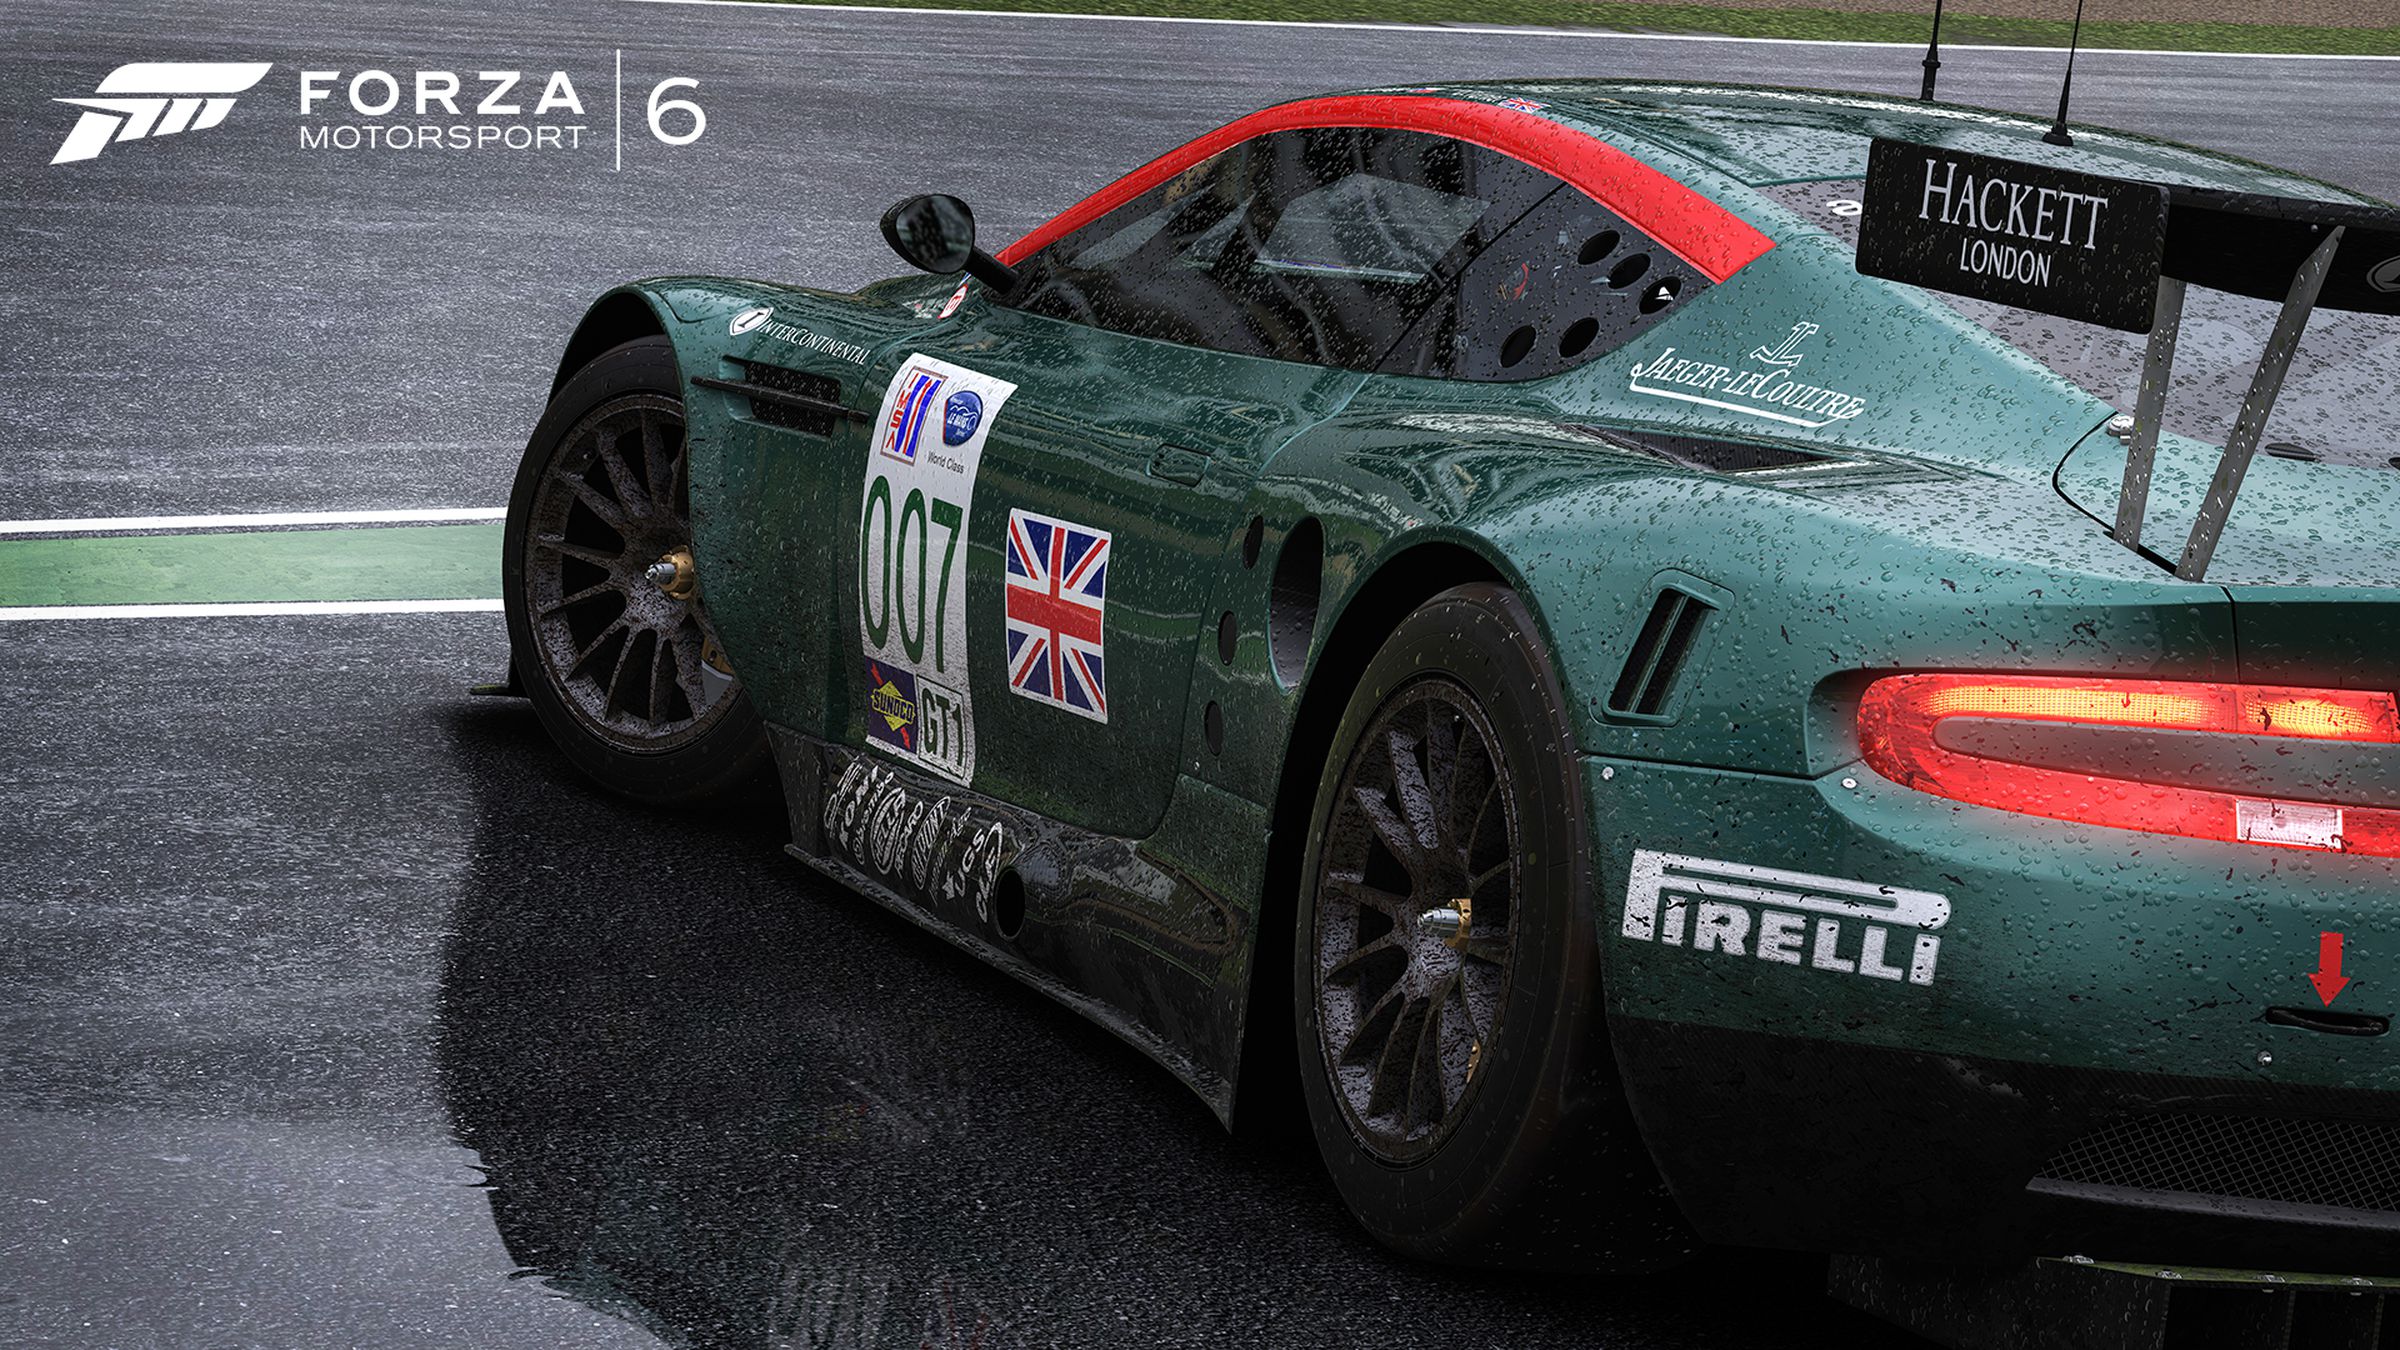 By rain or by shine, Forza 6 is a beast - Polygon